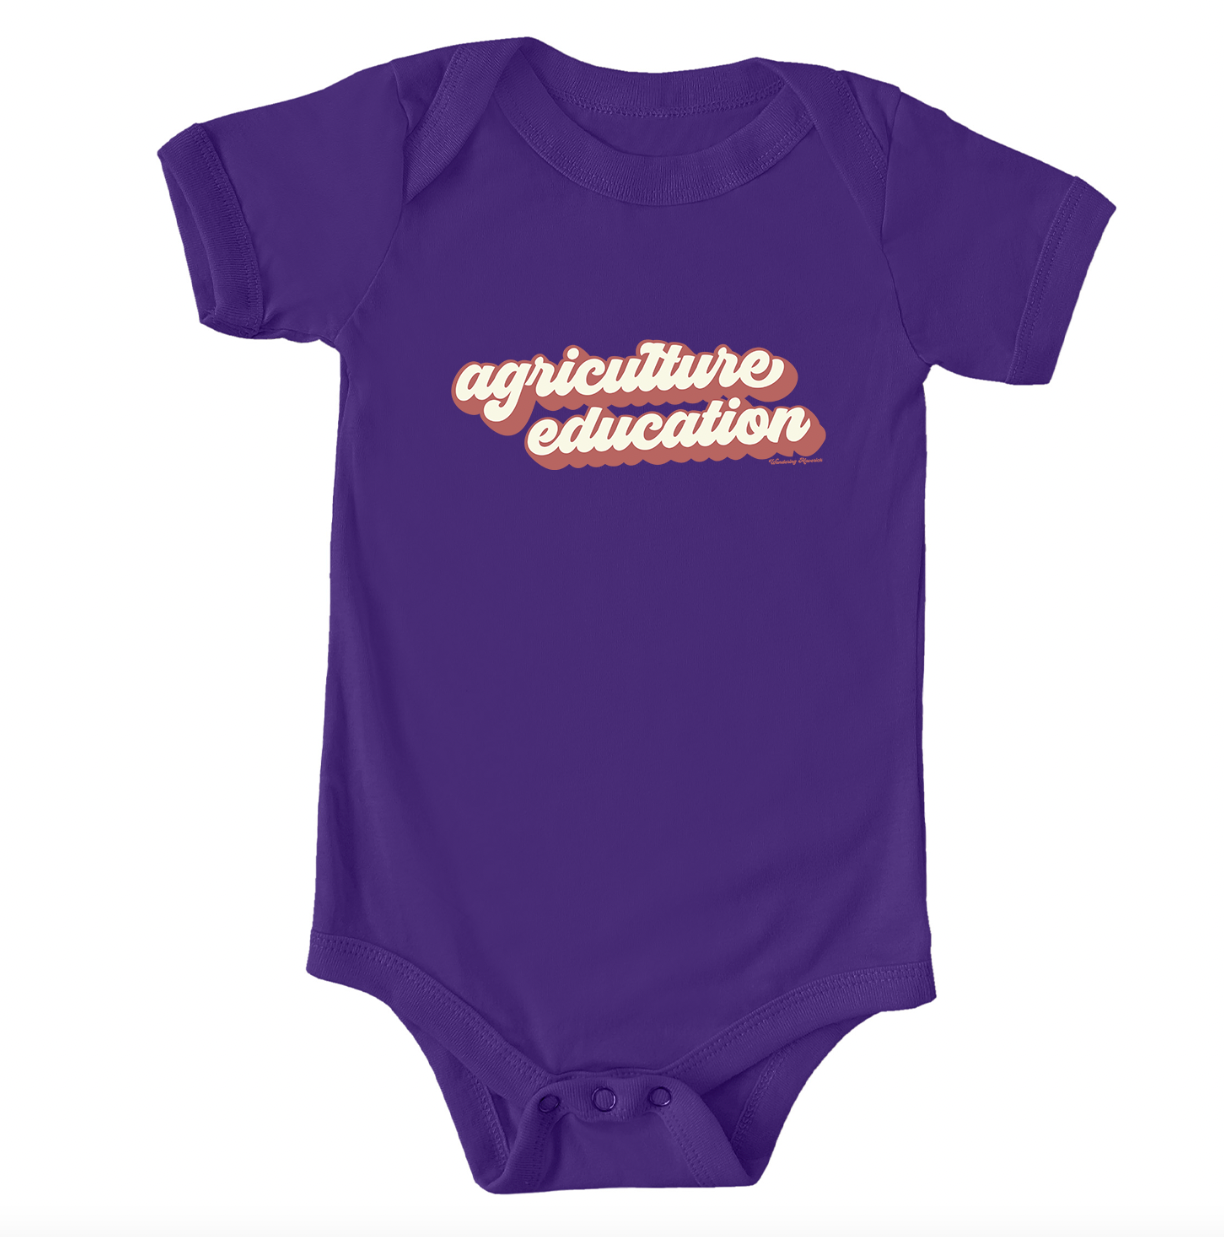 Retro Agriculture Education One Piece/T-Shirt (Newborn - Youth XL) - Multiple Colors!